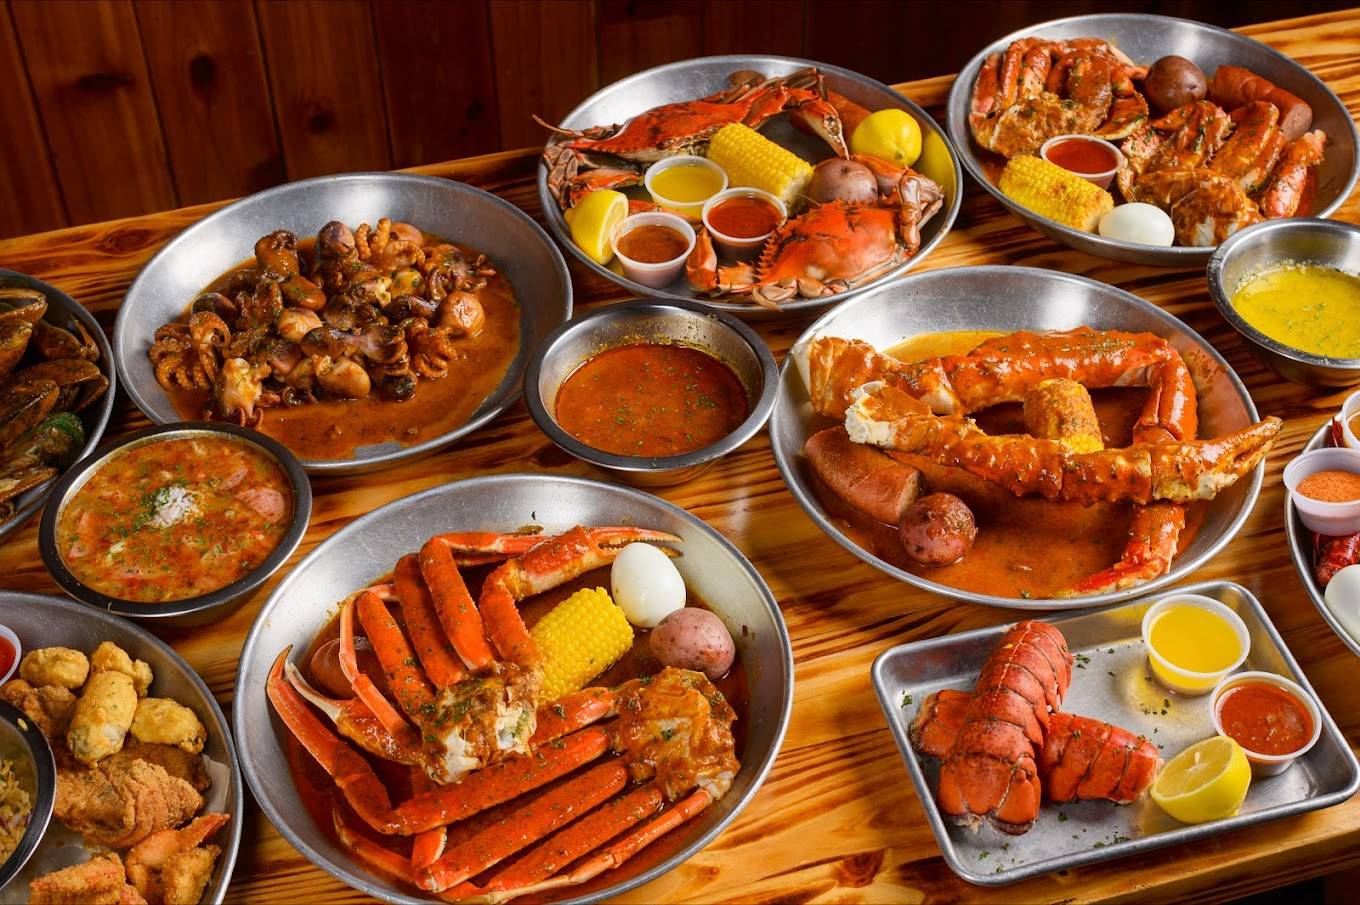 SEAHOLIC Houston Seafood & Oyster Bar - best seafood boil in Houston